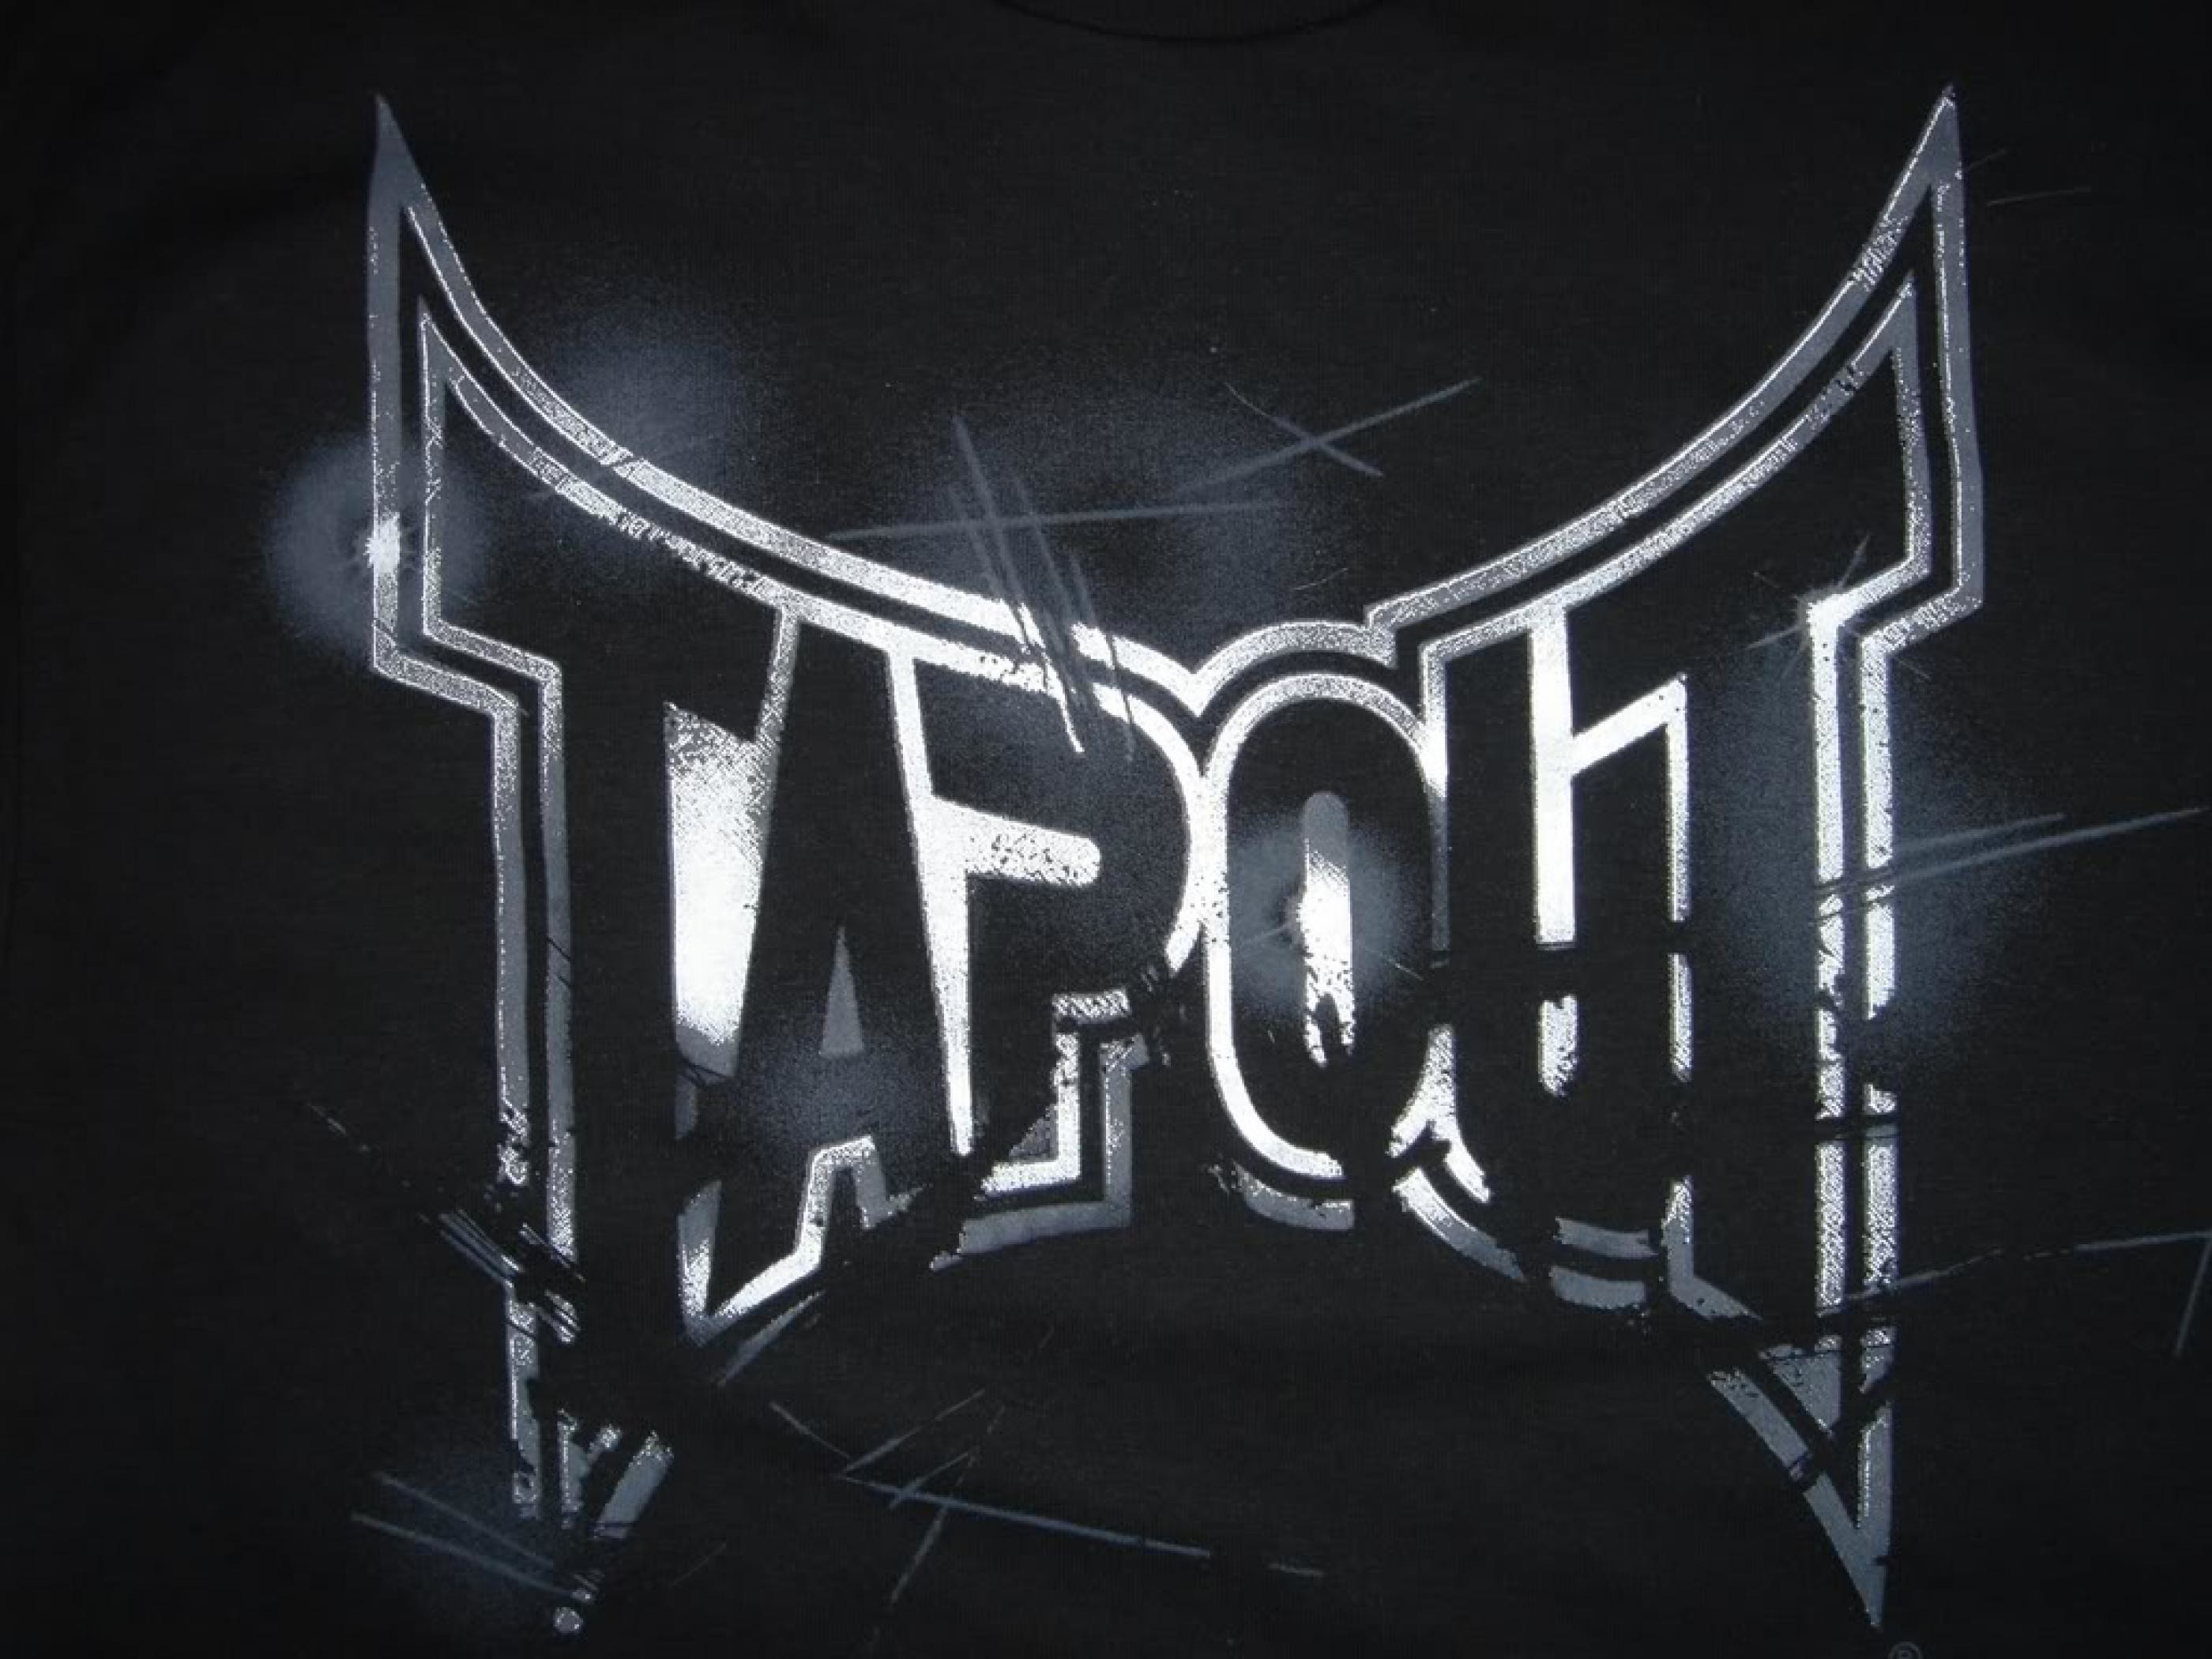 2800x2100 Mma tapout or backgrounds mma tapout or backgrounds mma tapout or  backgrounds jpg  Mma android